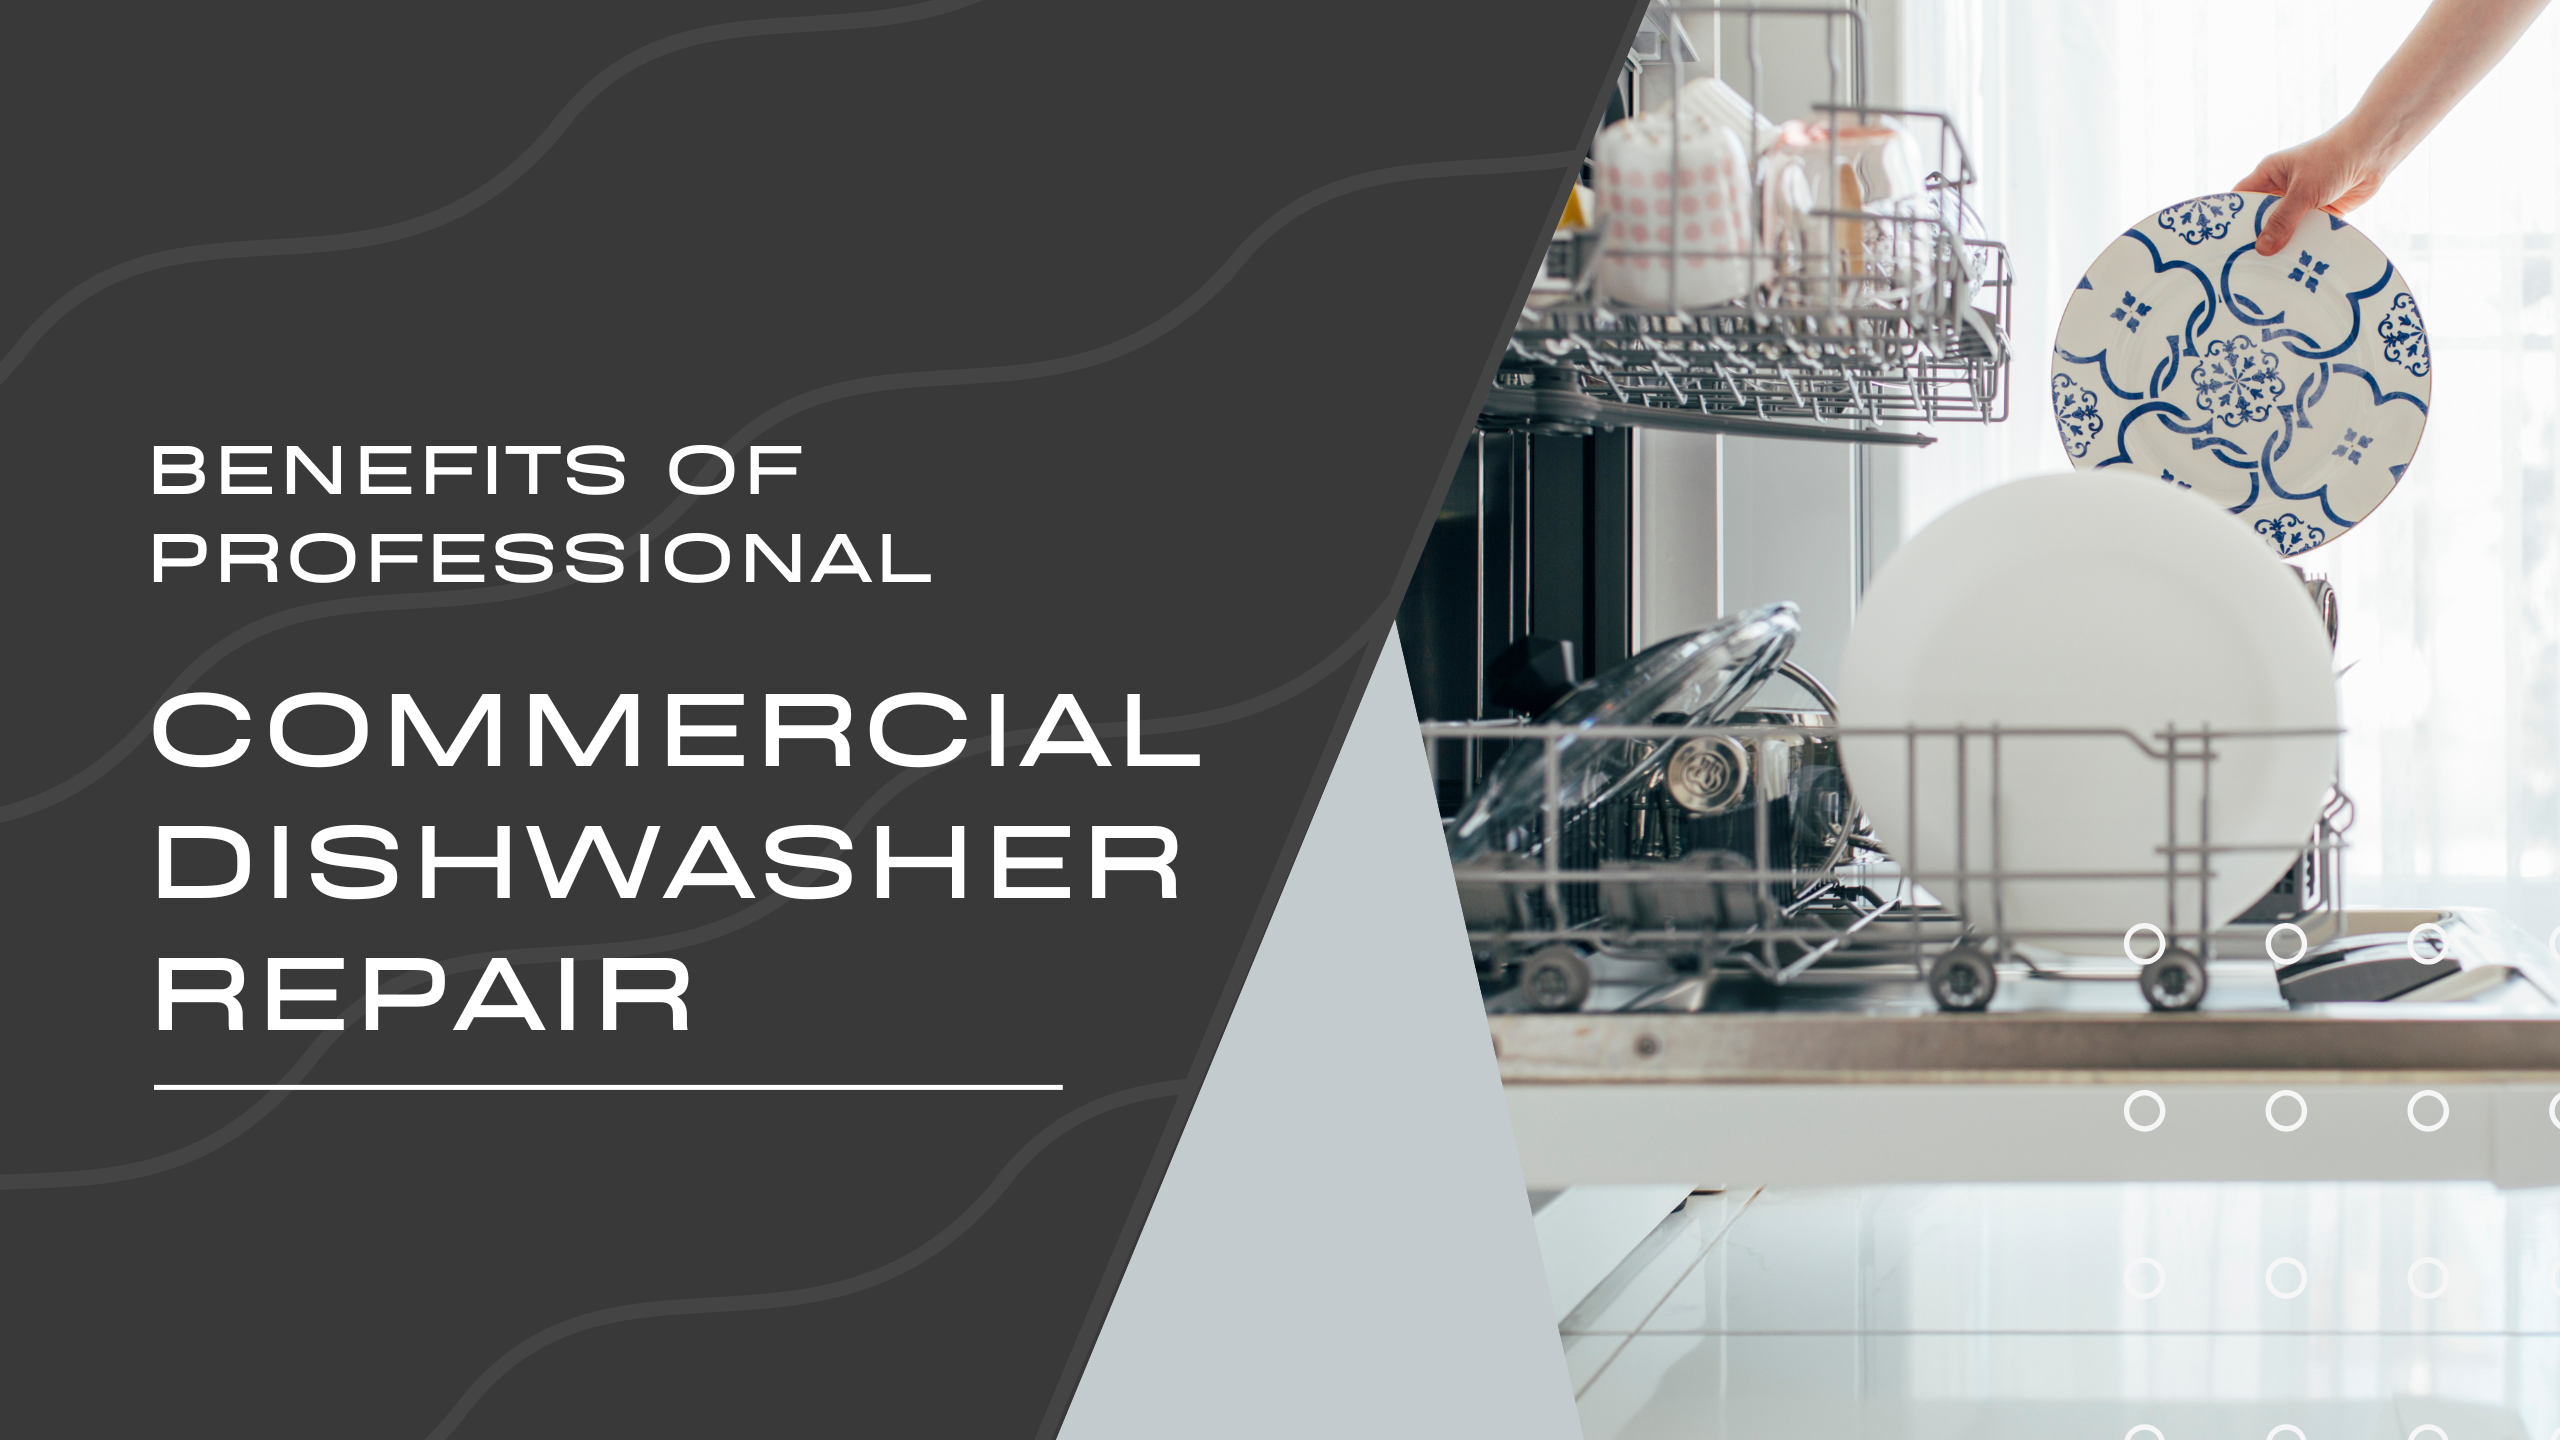 Benefits of Professional Commercial Dishwasher Repair Services